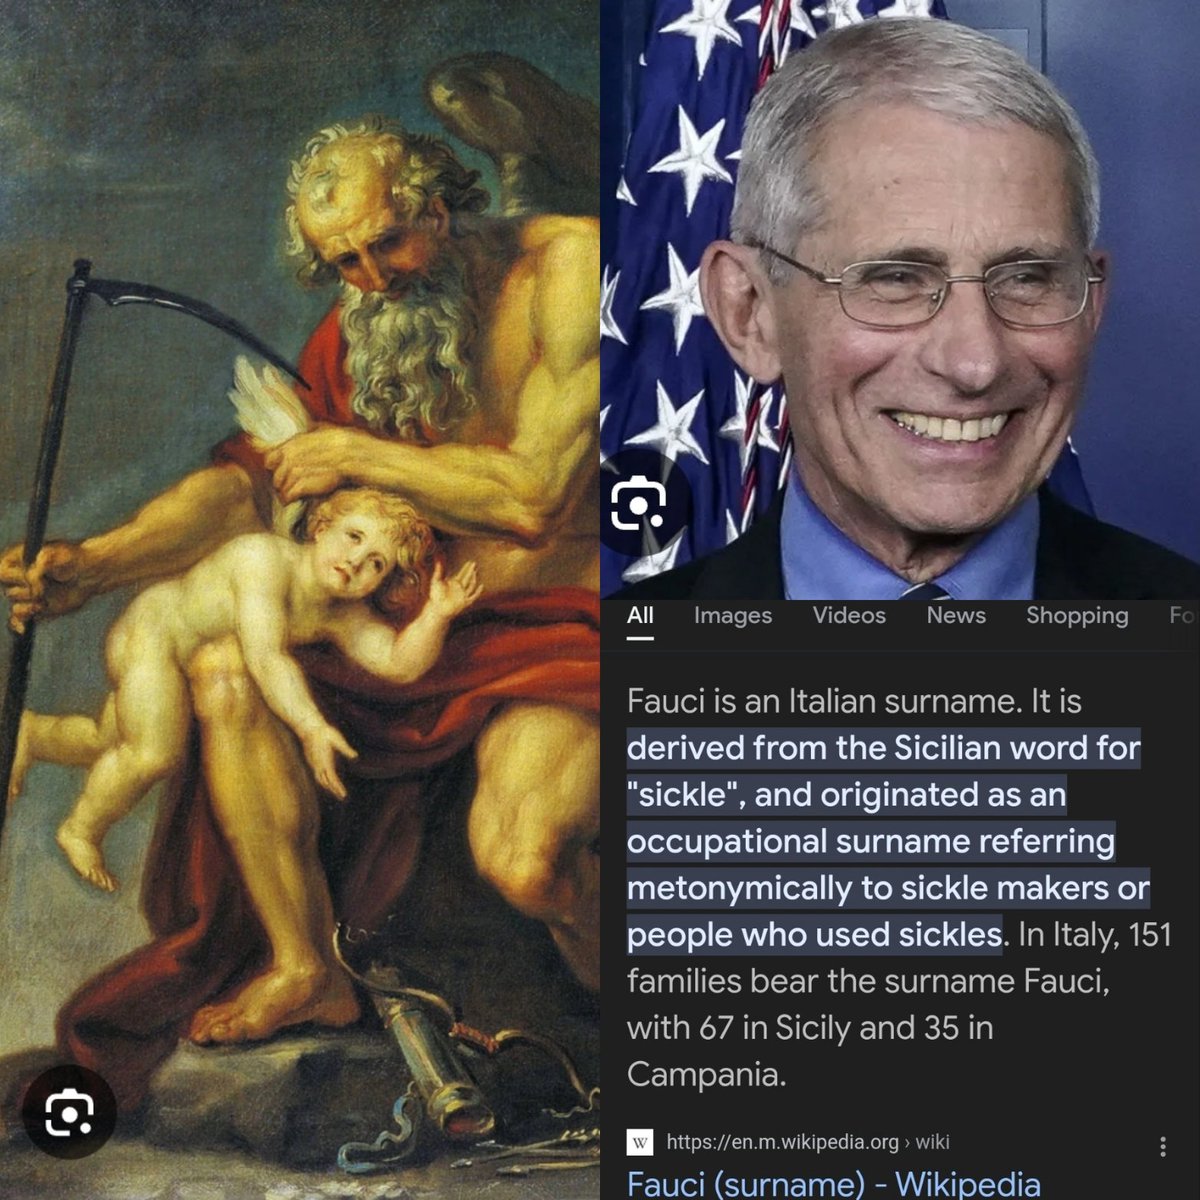 THE ROMAN GOD SATURN WAS THE GOD OF TIME & AGRICULTURAL. HE WAS THE FATHER OF JUPITER THE SKY GOD. SATURN WAS ALWAYS DEPICTED HOLDING A SICKLE & SACRIFICING A CHILD. 🤮

FAUCI'S NAME ORIGIN MEANS SICKLE...COINCIDENCE?🛠

SYMBOLISM WILL BE THERE DOWNFALL 🩸🩸🩸